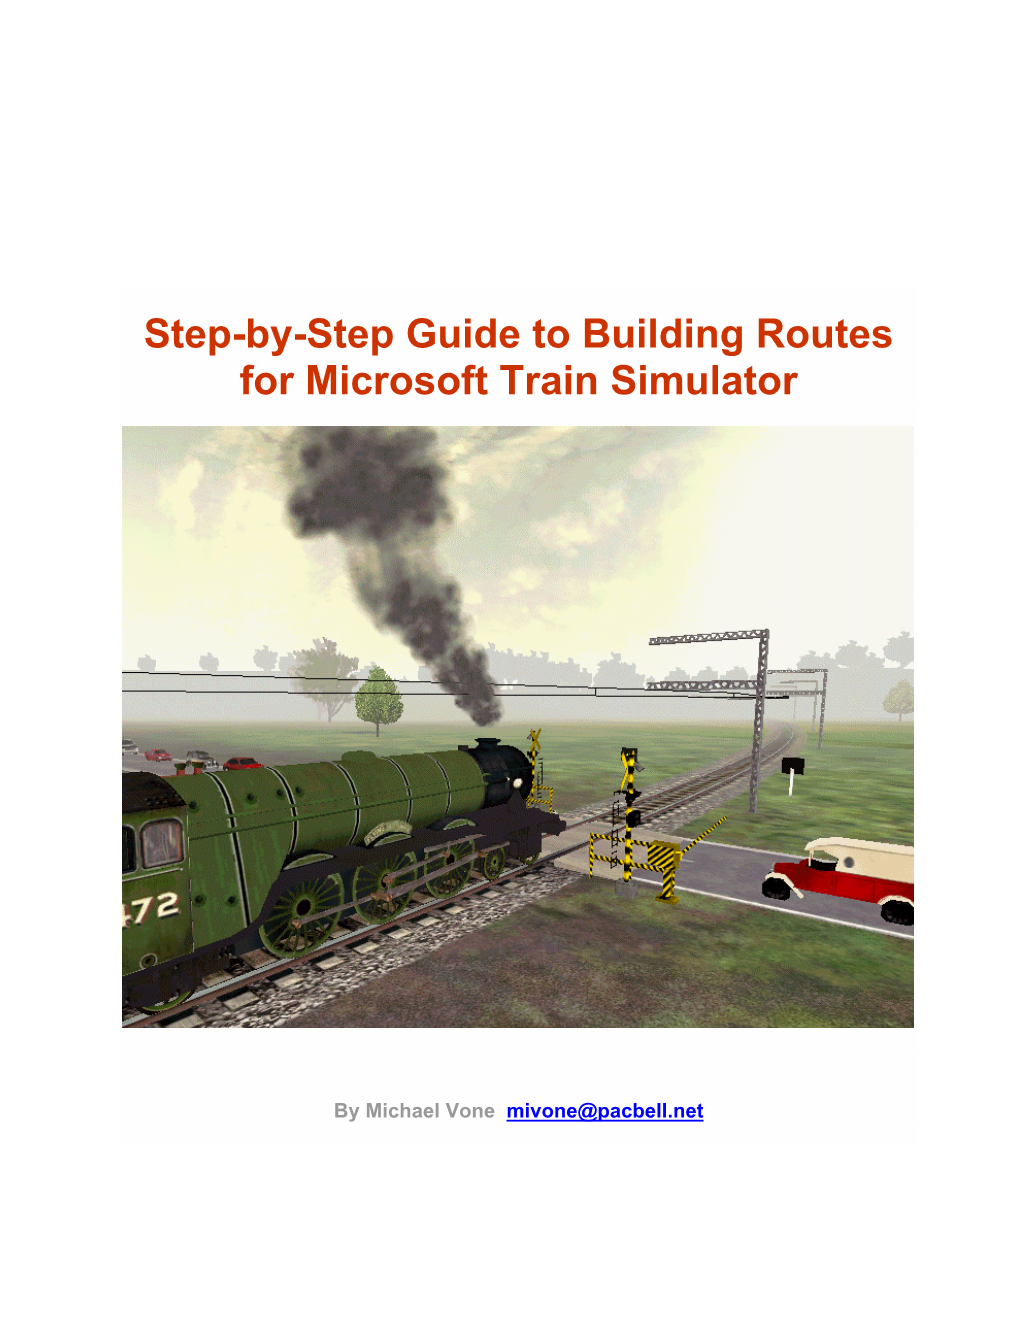 Step-By-Step Guide to Building Routes for Microsoft Train Simulator